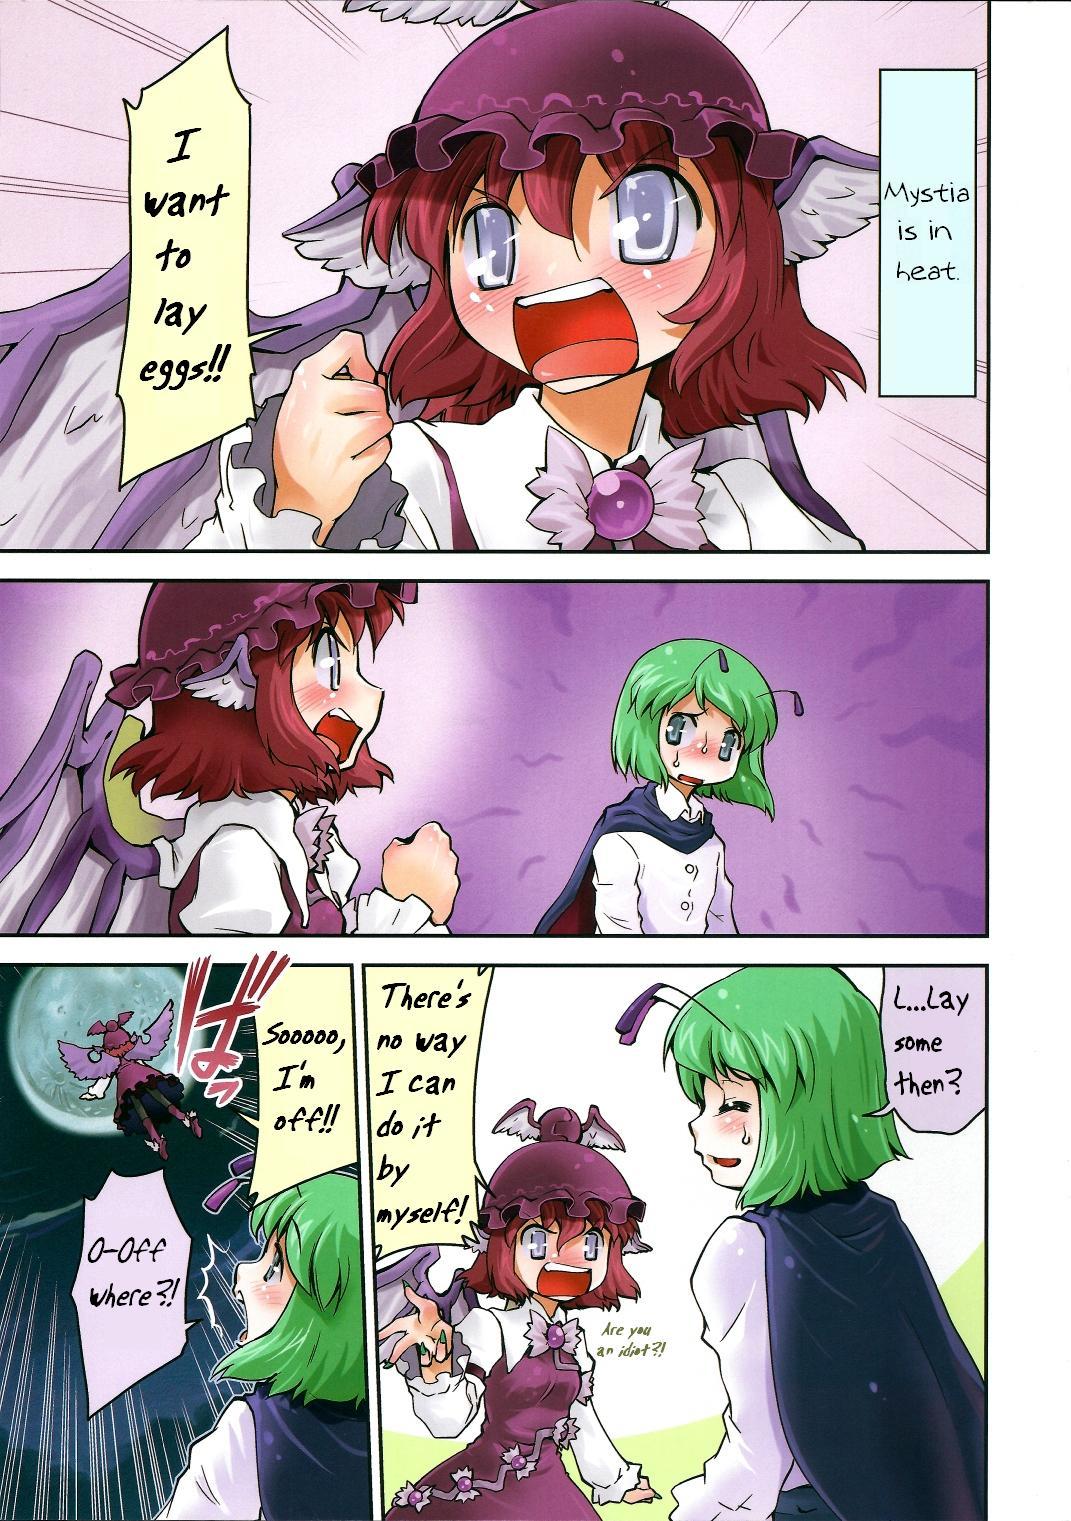 Swallow Kimi Omou | Mystia in Heat - Touhou project White Chick - Page 3